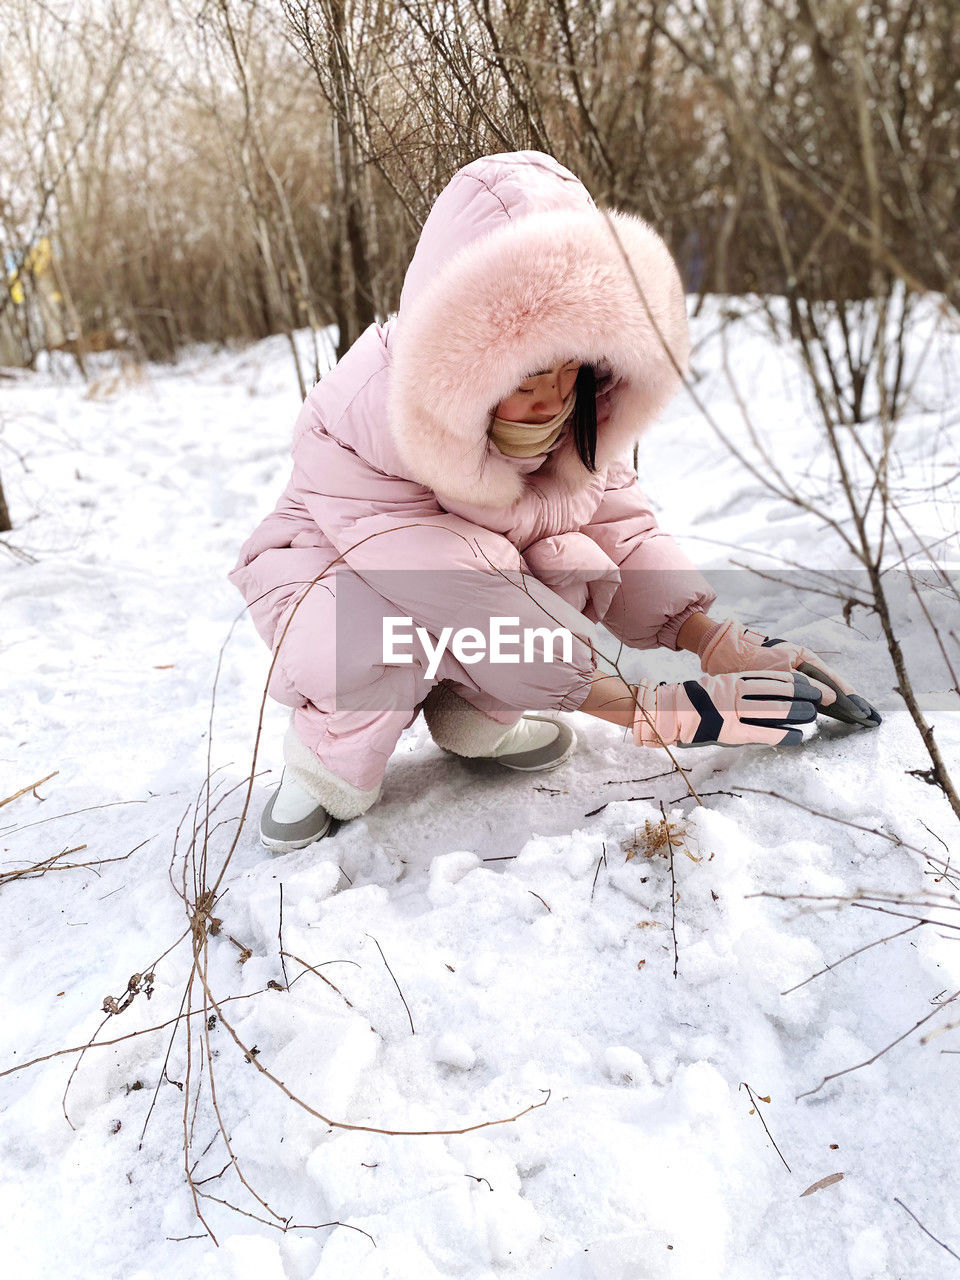 winter, childhood, child, cold temperature, snow, clothing, toddler, baby, one person, nature, full length, tree, spring, warm clothing, footwear, day, female, emotion, cute, pink, land, sitting, innocence, outdoors, plant, hat, women, person, lifestyles